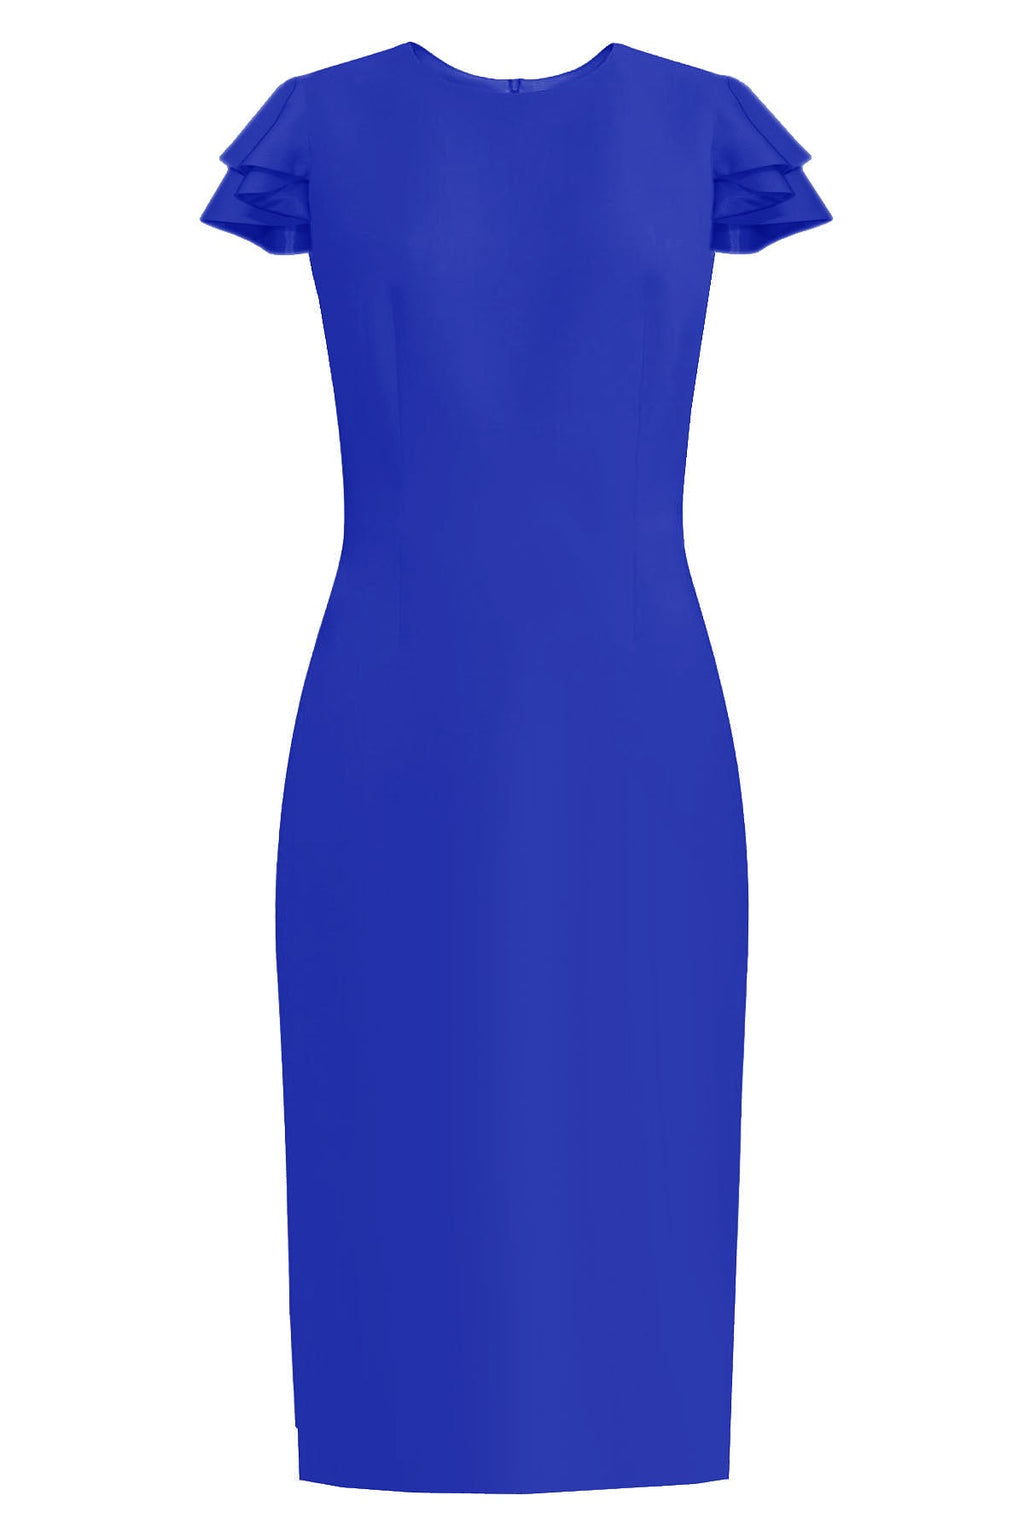 Estella Royal Blue Sheath dress with Butterfly Sleeves